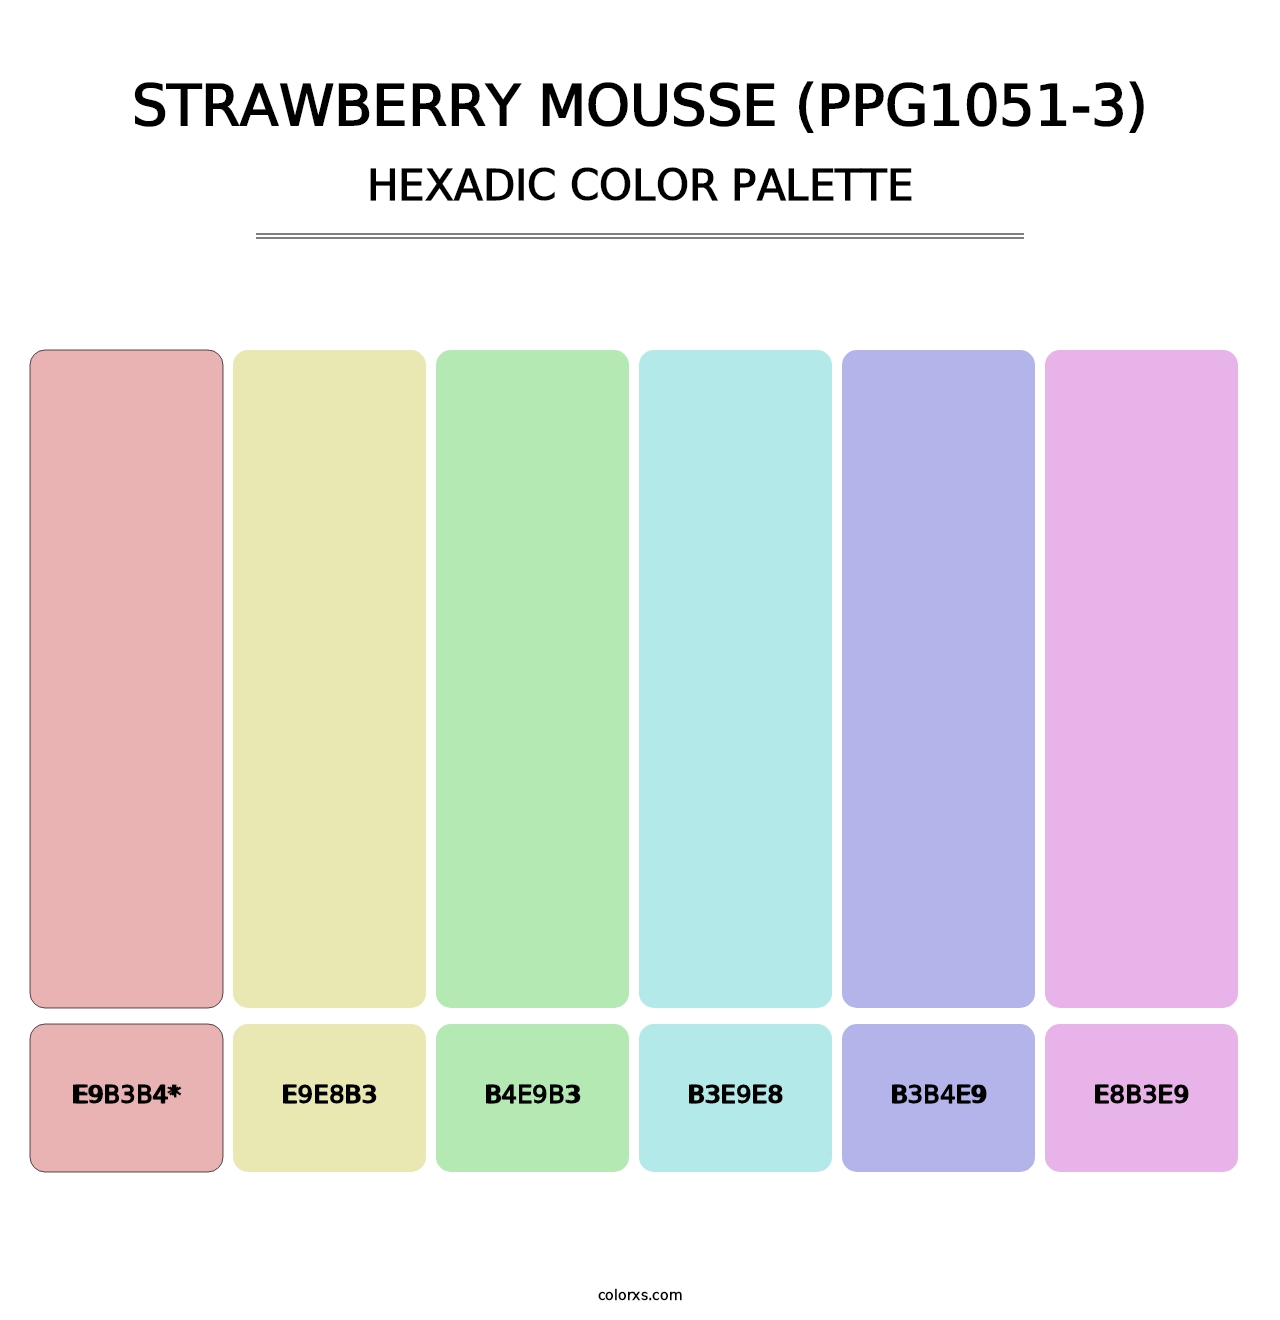 Strawberry Mousse (PPG1051-3) - Hexadic Color Palette